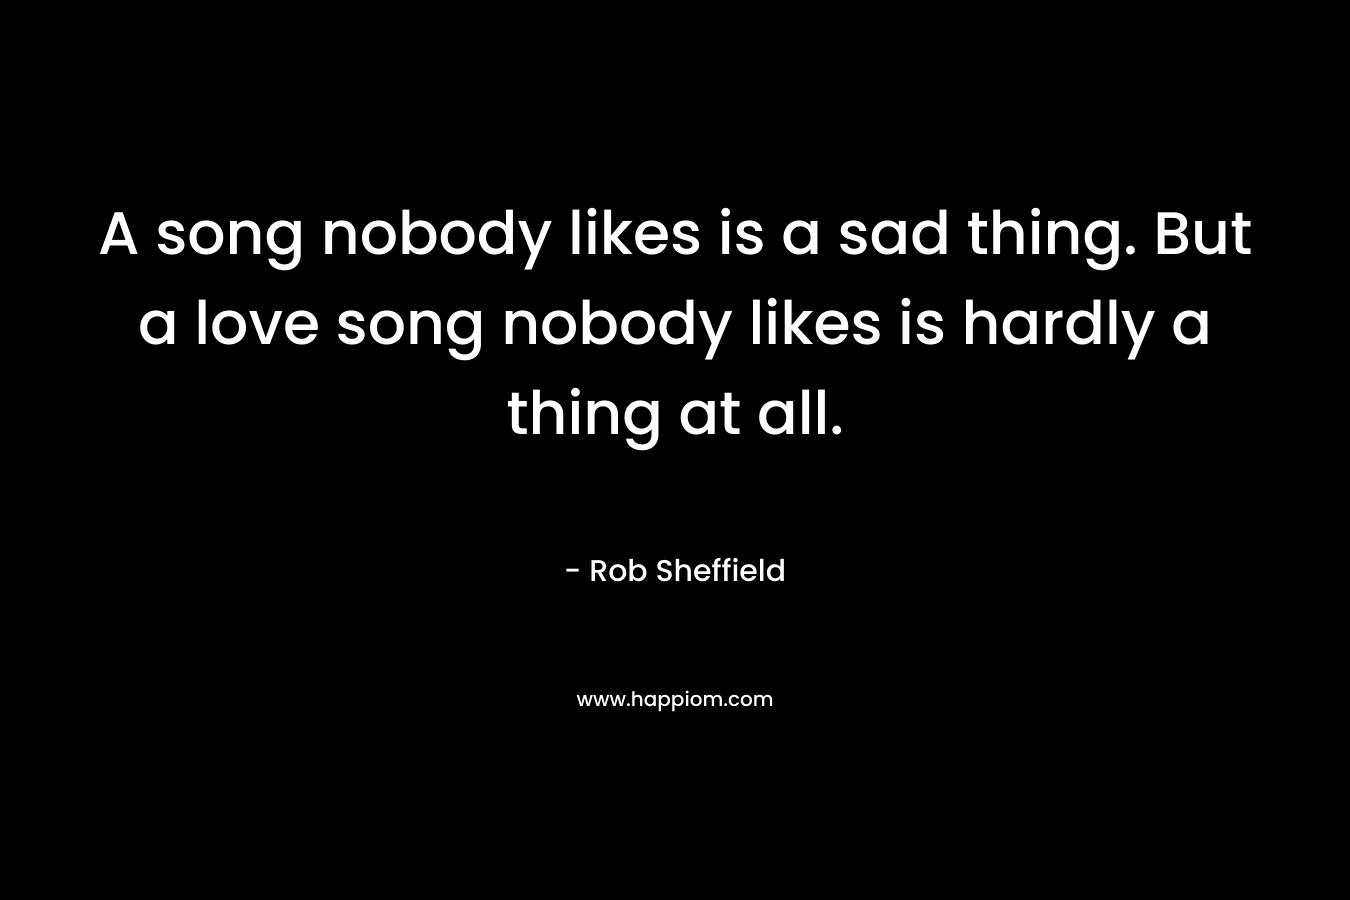 A song nobody likes is a sad thing. But a love song nobody likes is hardly a thing at all.